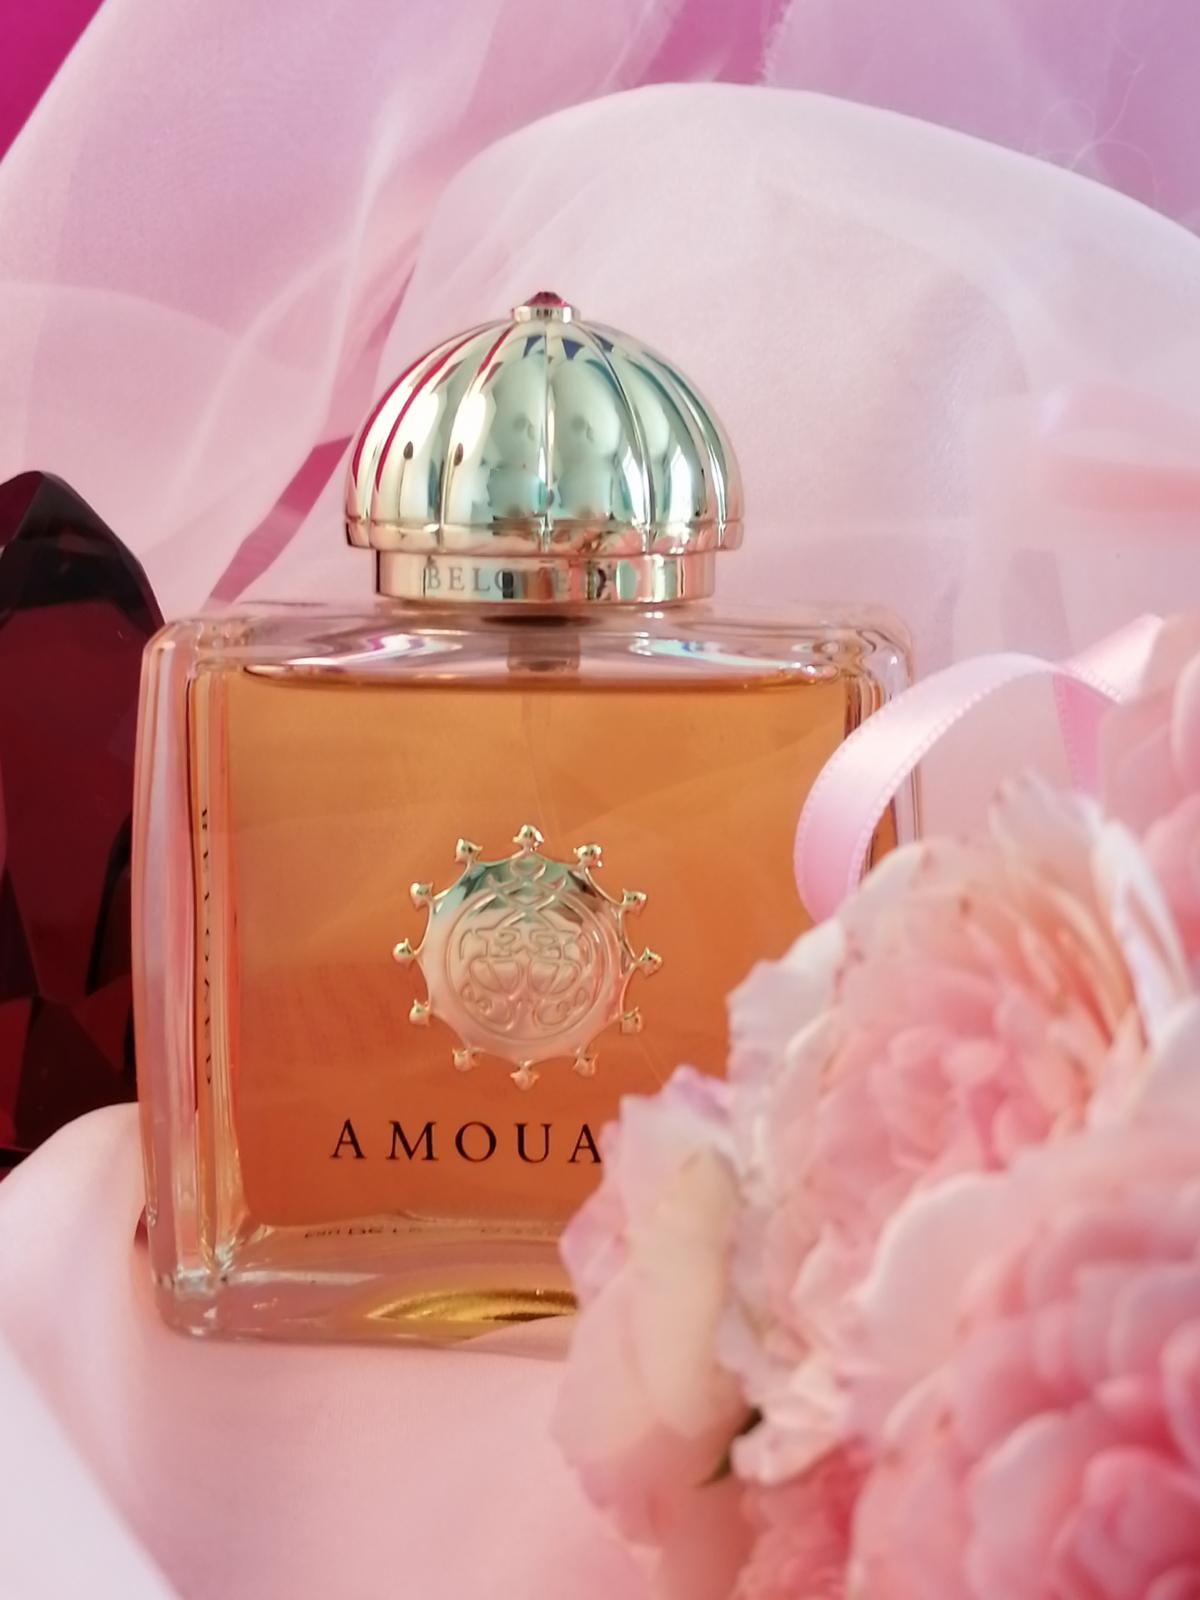 Beloved Amouage perfume - a fragrance for women 2012